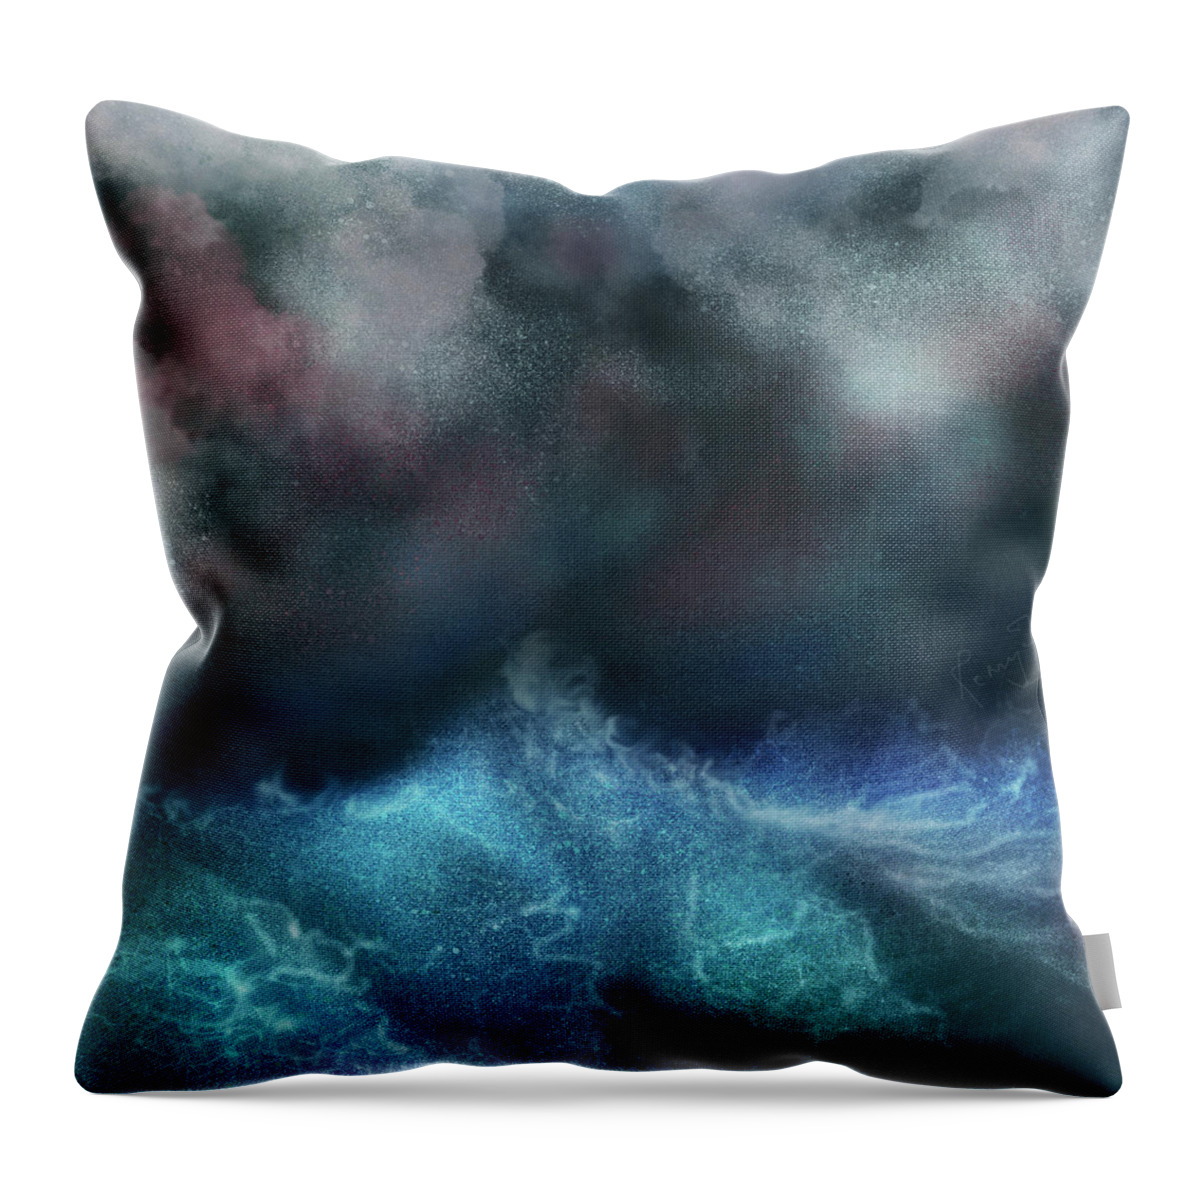 Sea Throw Pillow featuring the digital art Wild Seas by Remy Francis